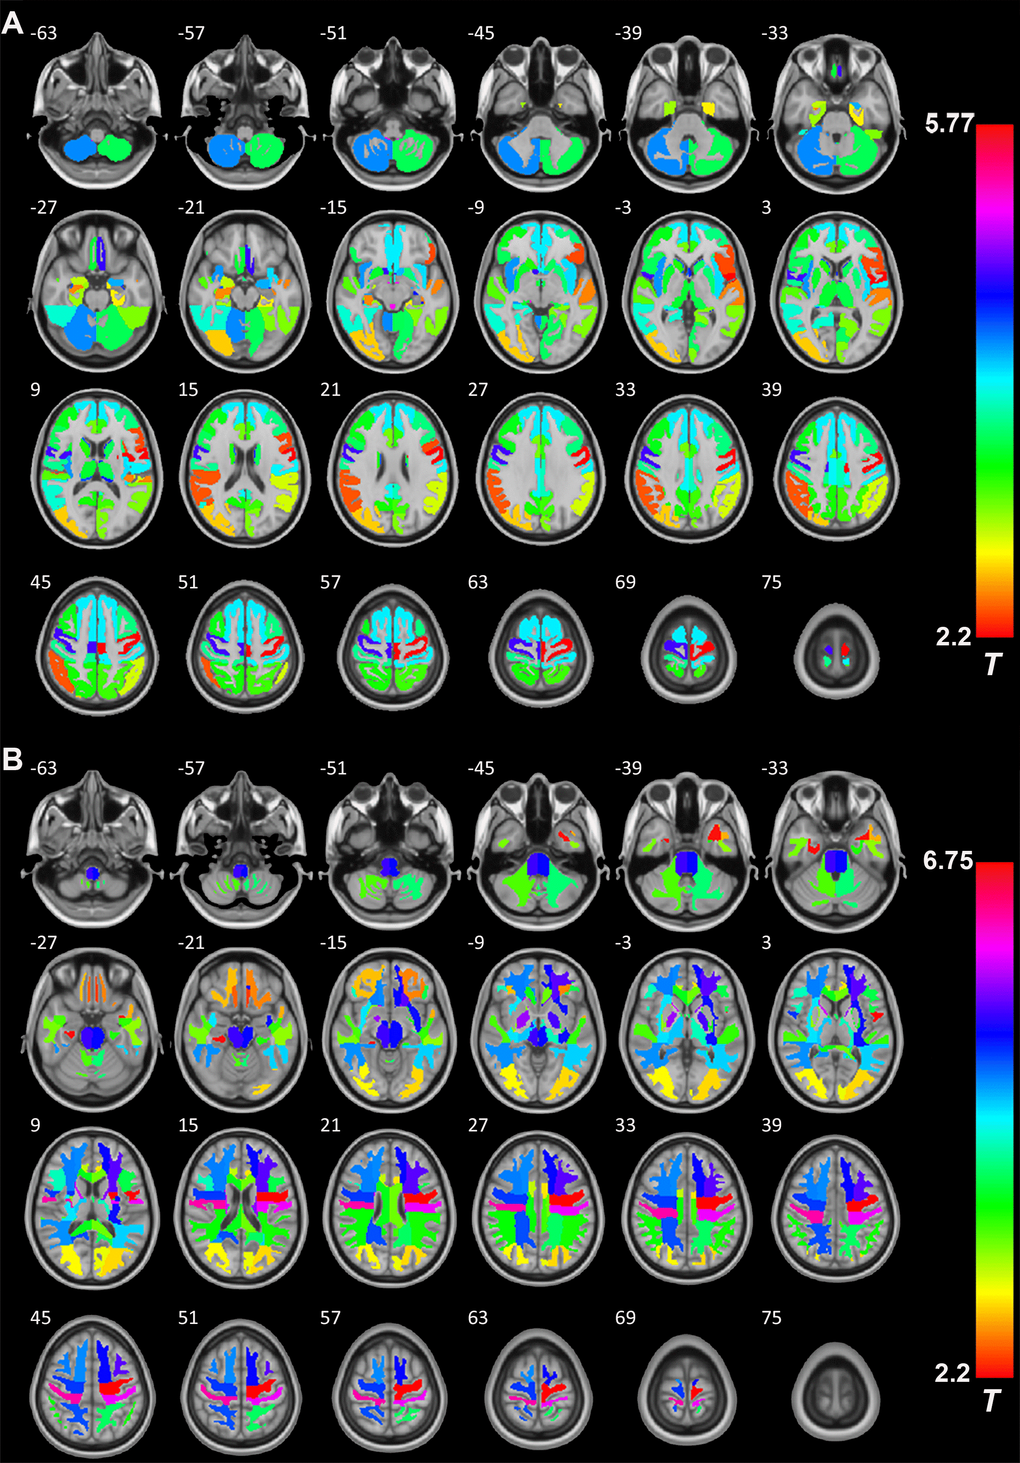 The role of GH/IGF-1 in the GMV and WMV of brain regions. (A) RBM analysis showing the increased GMV of 54 brain regions (Supplementary Table 1, from a total of 68 brain regions, Hammers' atlas) in patients with excess GH/IGF-1 production compared to that in HCs. (B) RBM analysis showing the white matter volume (WMV) of 54 brain regions (Supplementary Table 1, from a total of 68 brain regions, Hammers' atlas) increase in patients with excess GH/IGF-1 production compared to HCs. Significance was determined by uncorrected p 